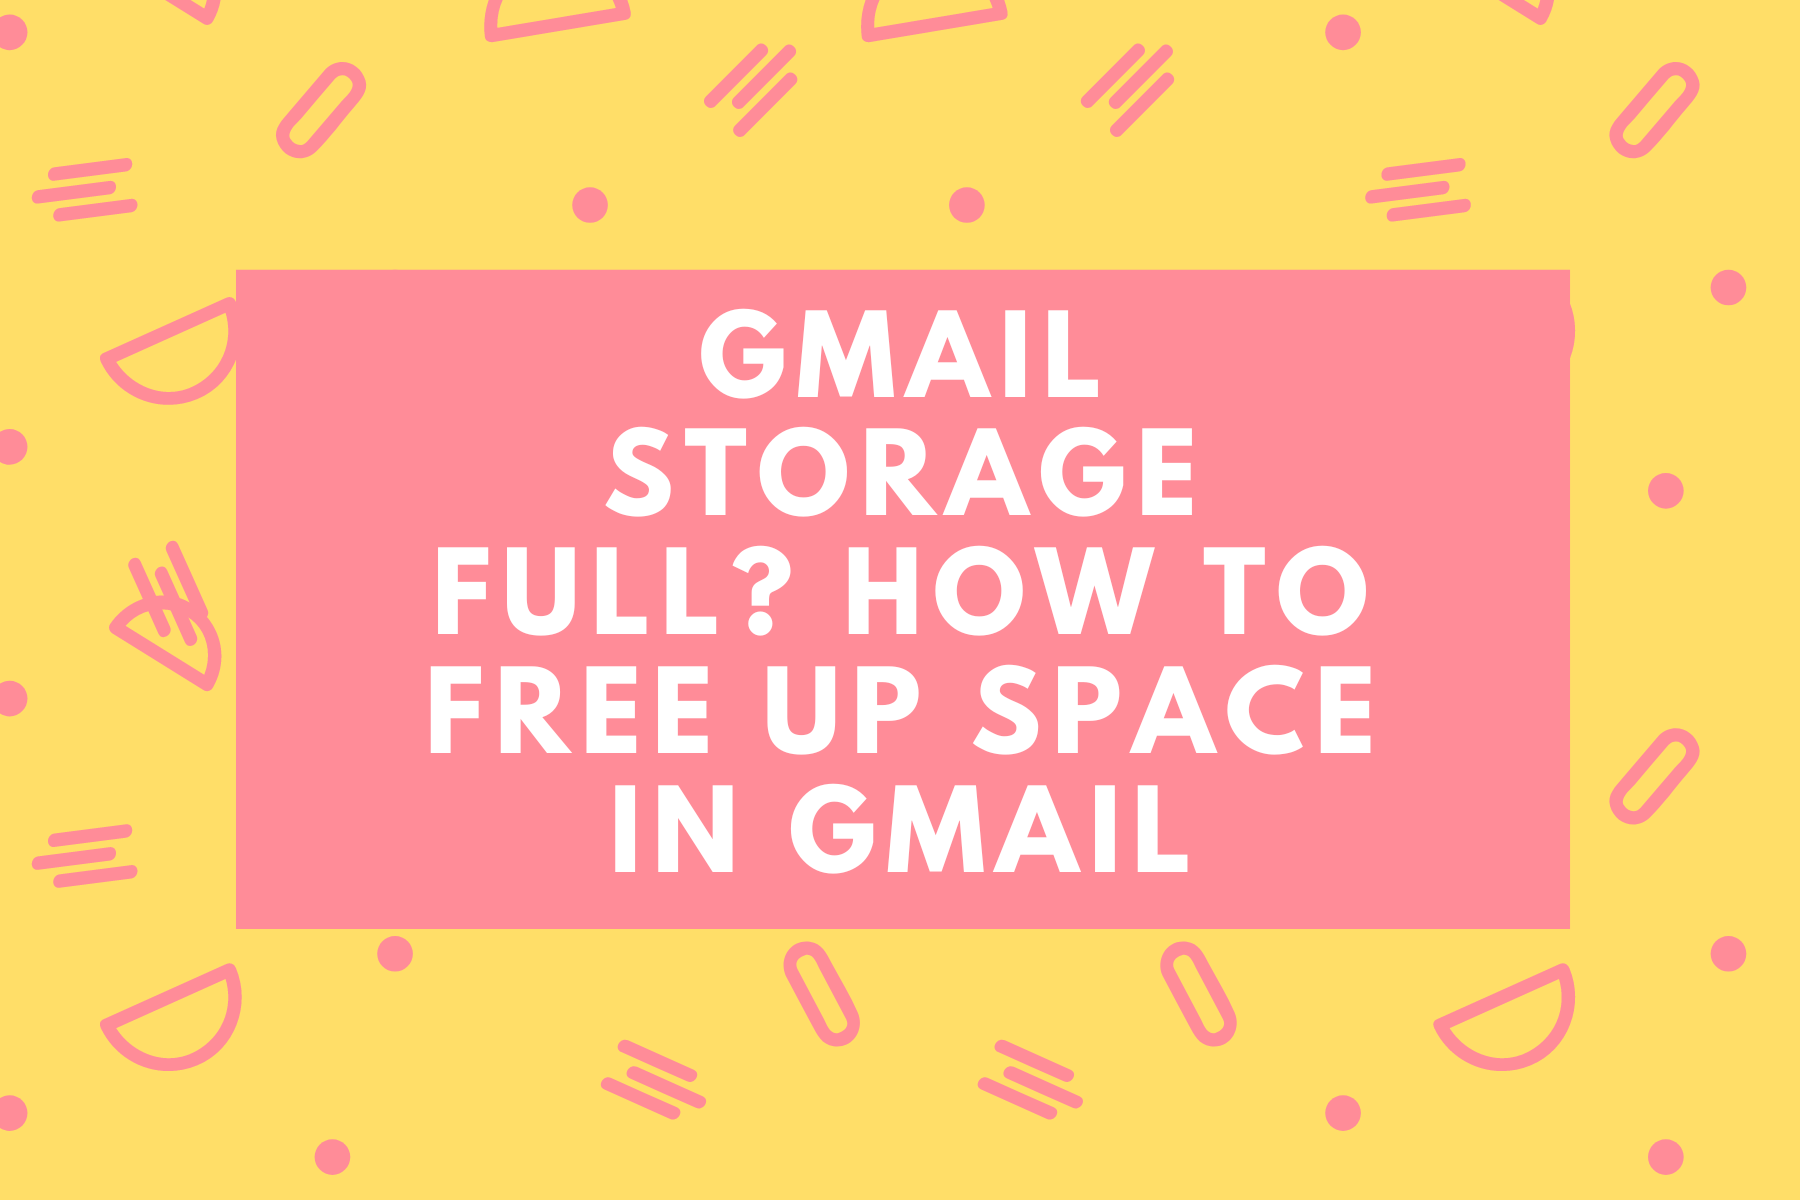 Gmail Storage Full? How to Free up Space in Gmail